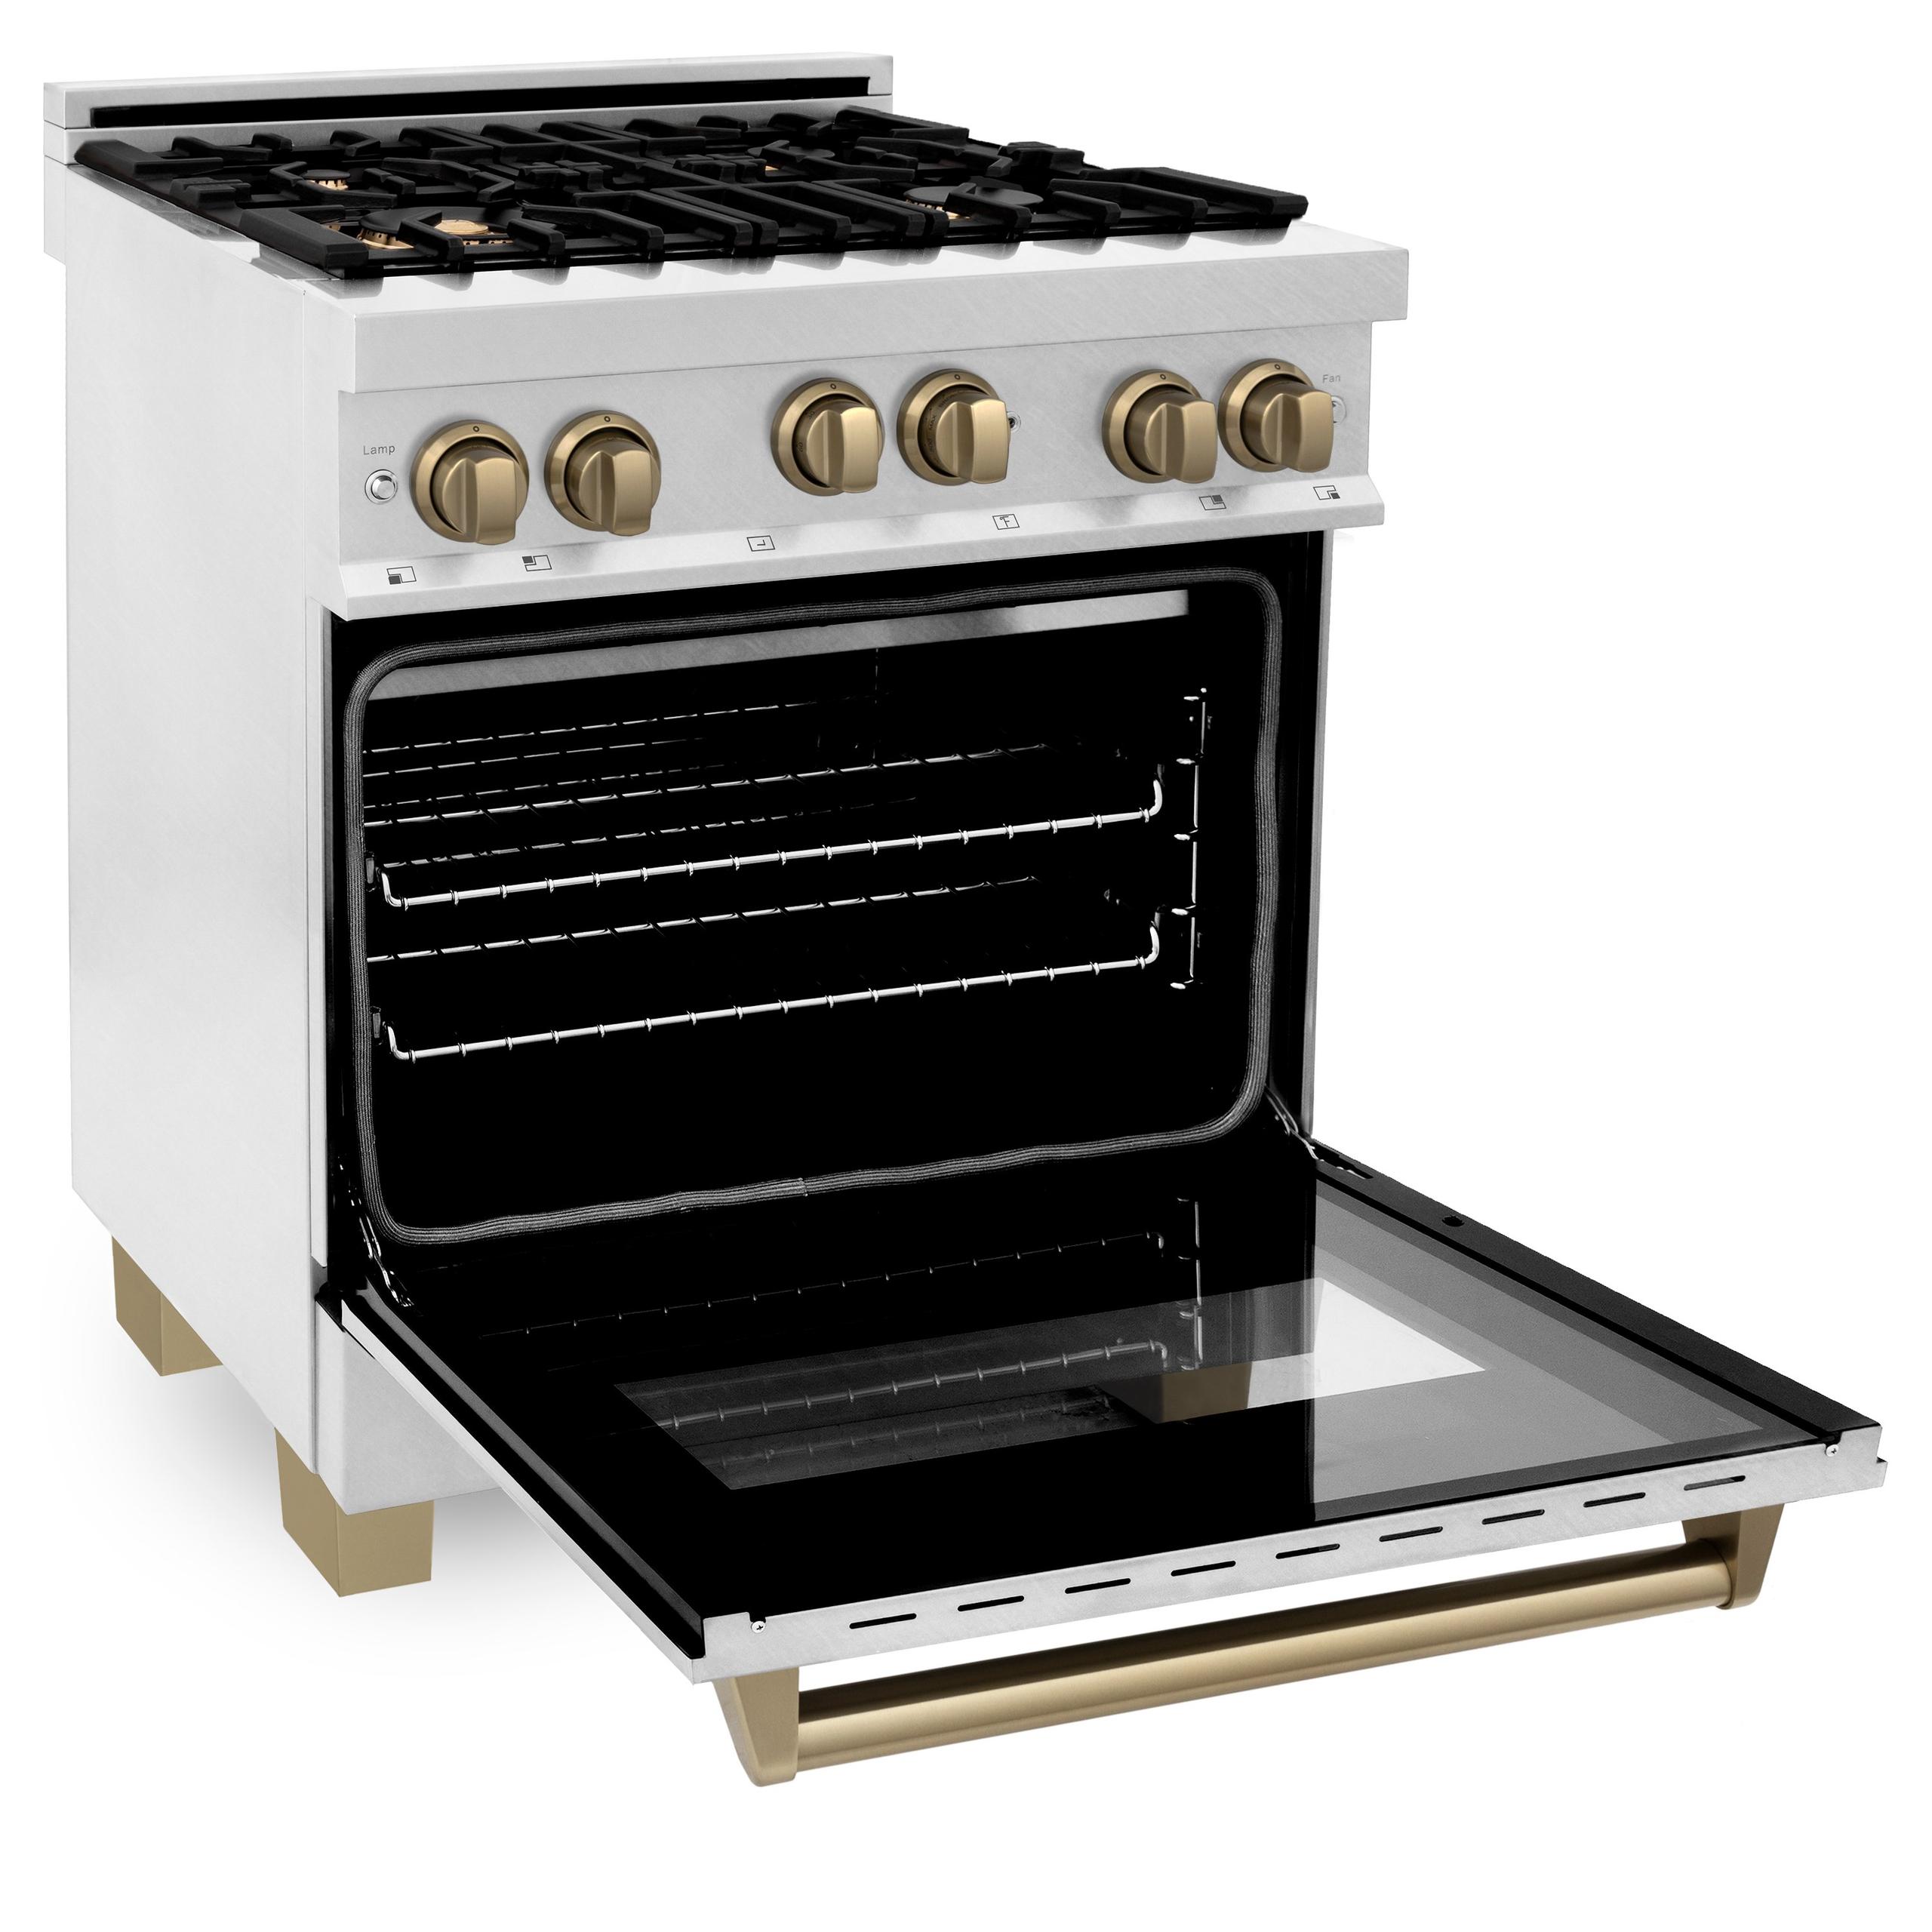 ZLINE KITCHEN AND BATH RGSZSN30G ZLINE 30" 4.0 cu. ft. Range with Gas Stove and Gas Oven in DuraSnow R Stainless Steel with Accents Accent: Gold